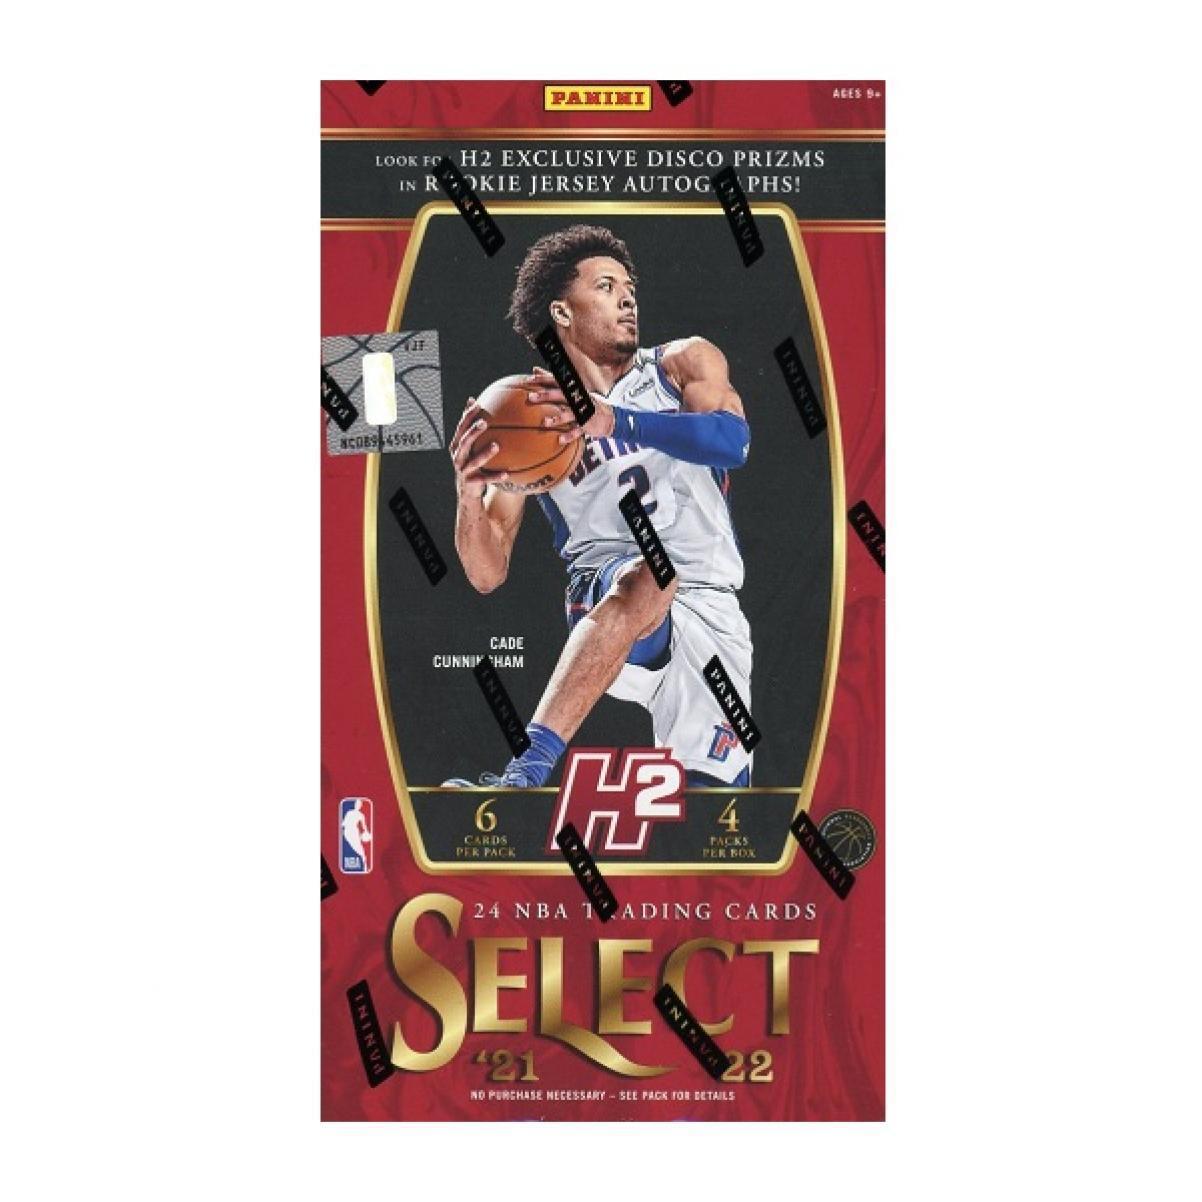 2021-22 Select Basketball H2 Box CARDS LIVE OPENING @PackPalace